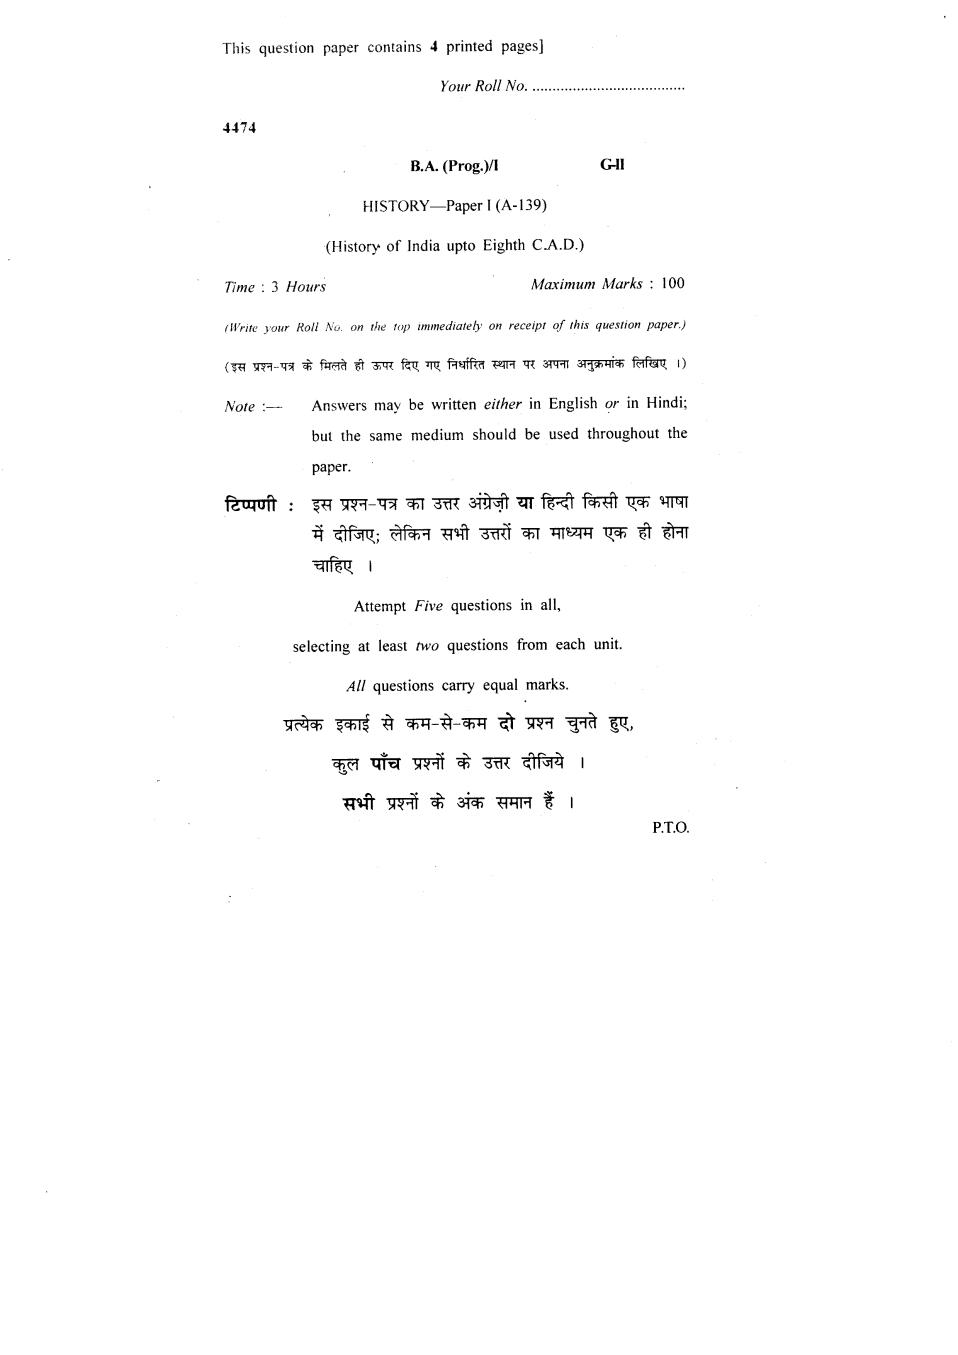 DU SOL Question Paper 2018 BA History - History of India upto Eight C.A.D - Page 1